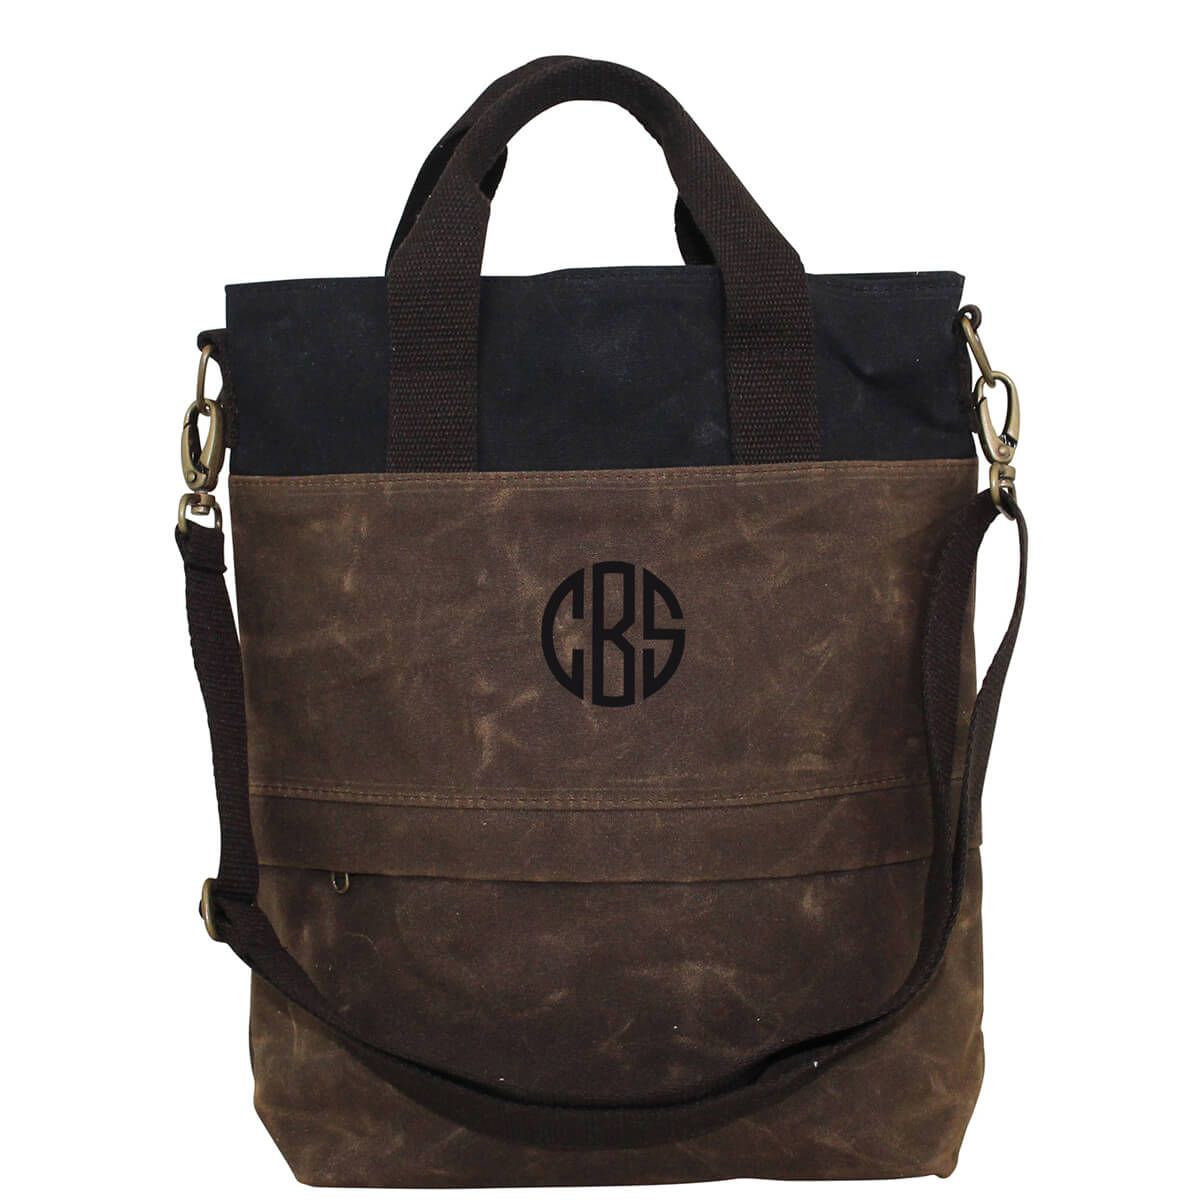 Monogrammed Waxed Canvas Travel All Day Tote Knapsack Bag Luggage Tote Bag Laptop